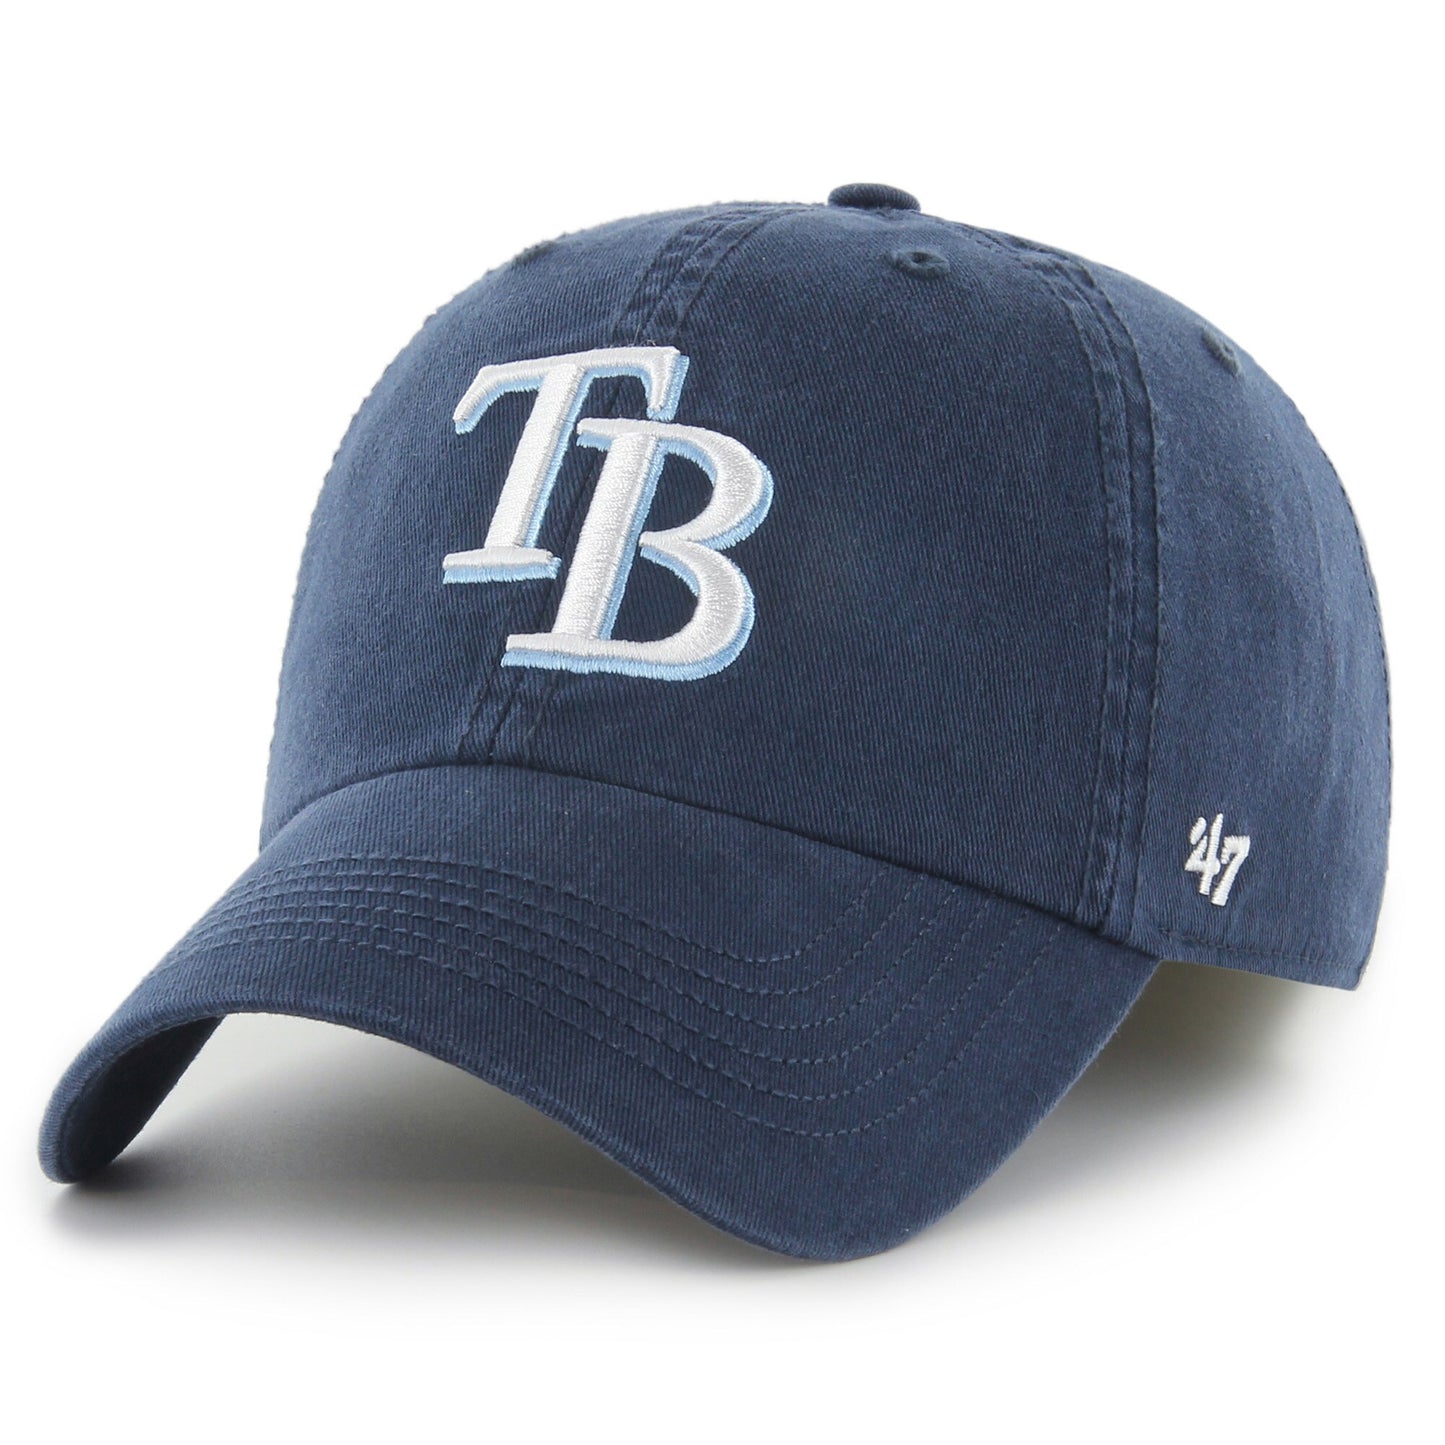 Tampa Bay Rays '47 Franchise Logo Fitted Hat - Navy